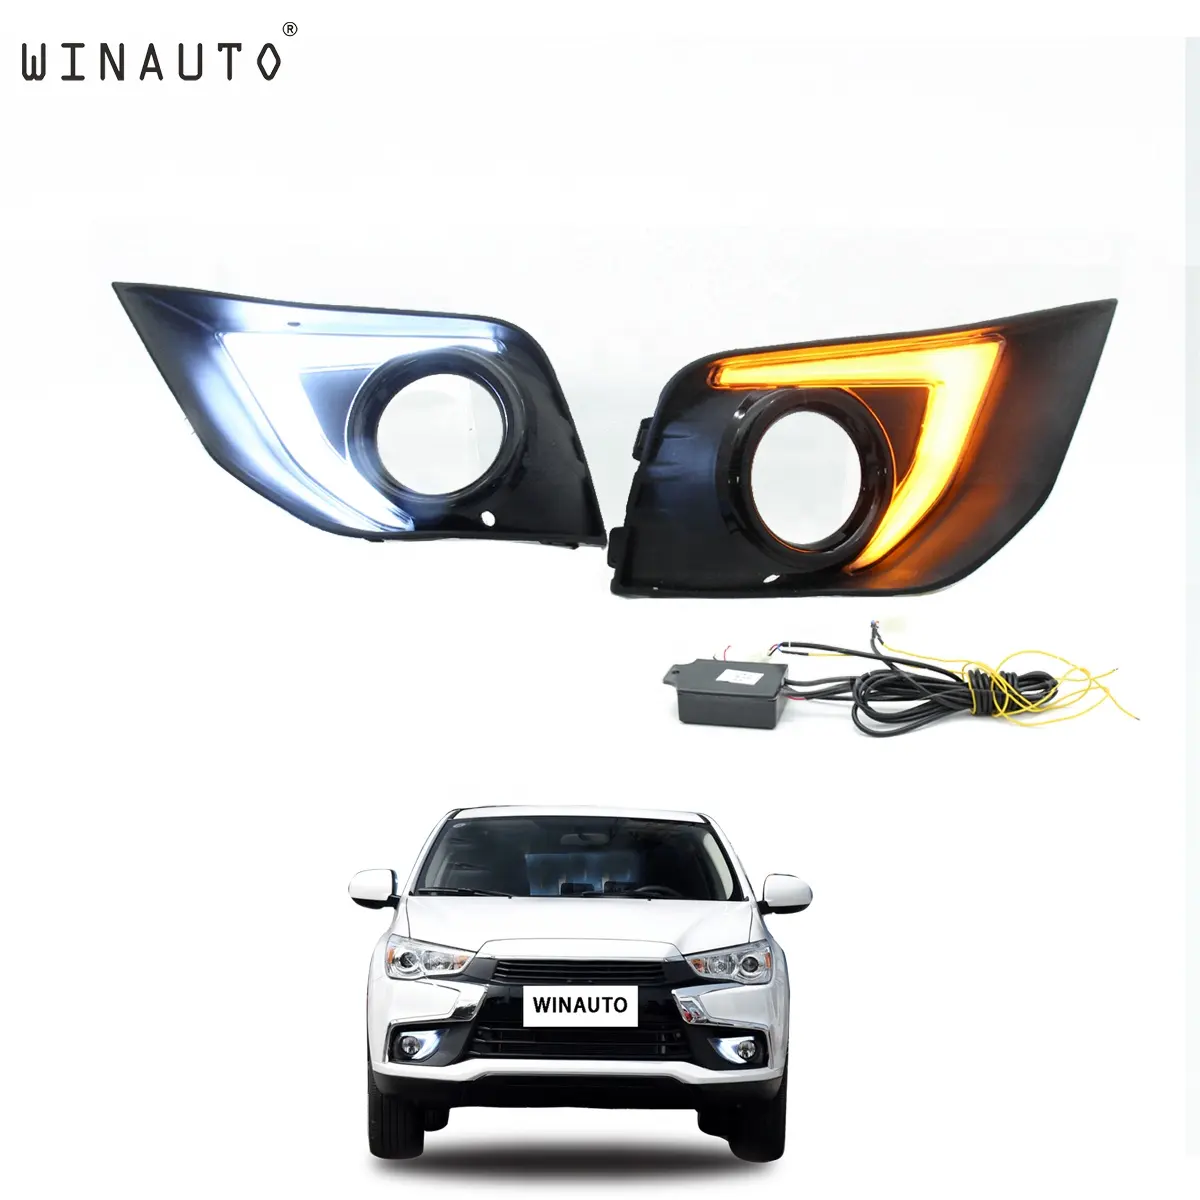 WINAUTO LED daytime Running front bumper fog Light DRL For Mitsubishi ASX Or Outlander Sport 2016 - 2017 yellow turn signal